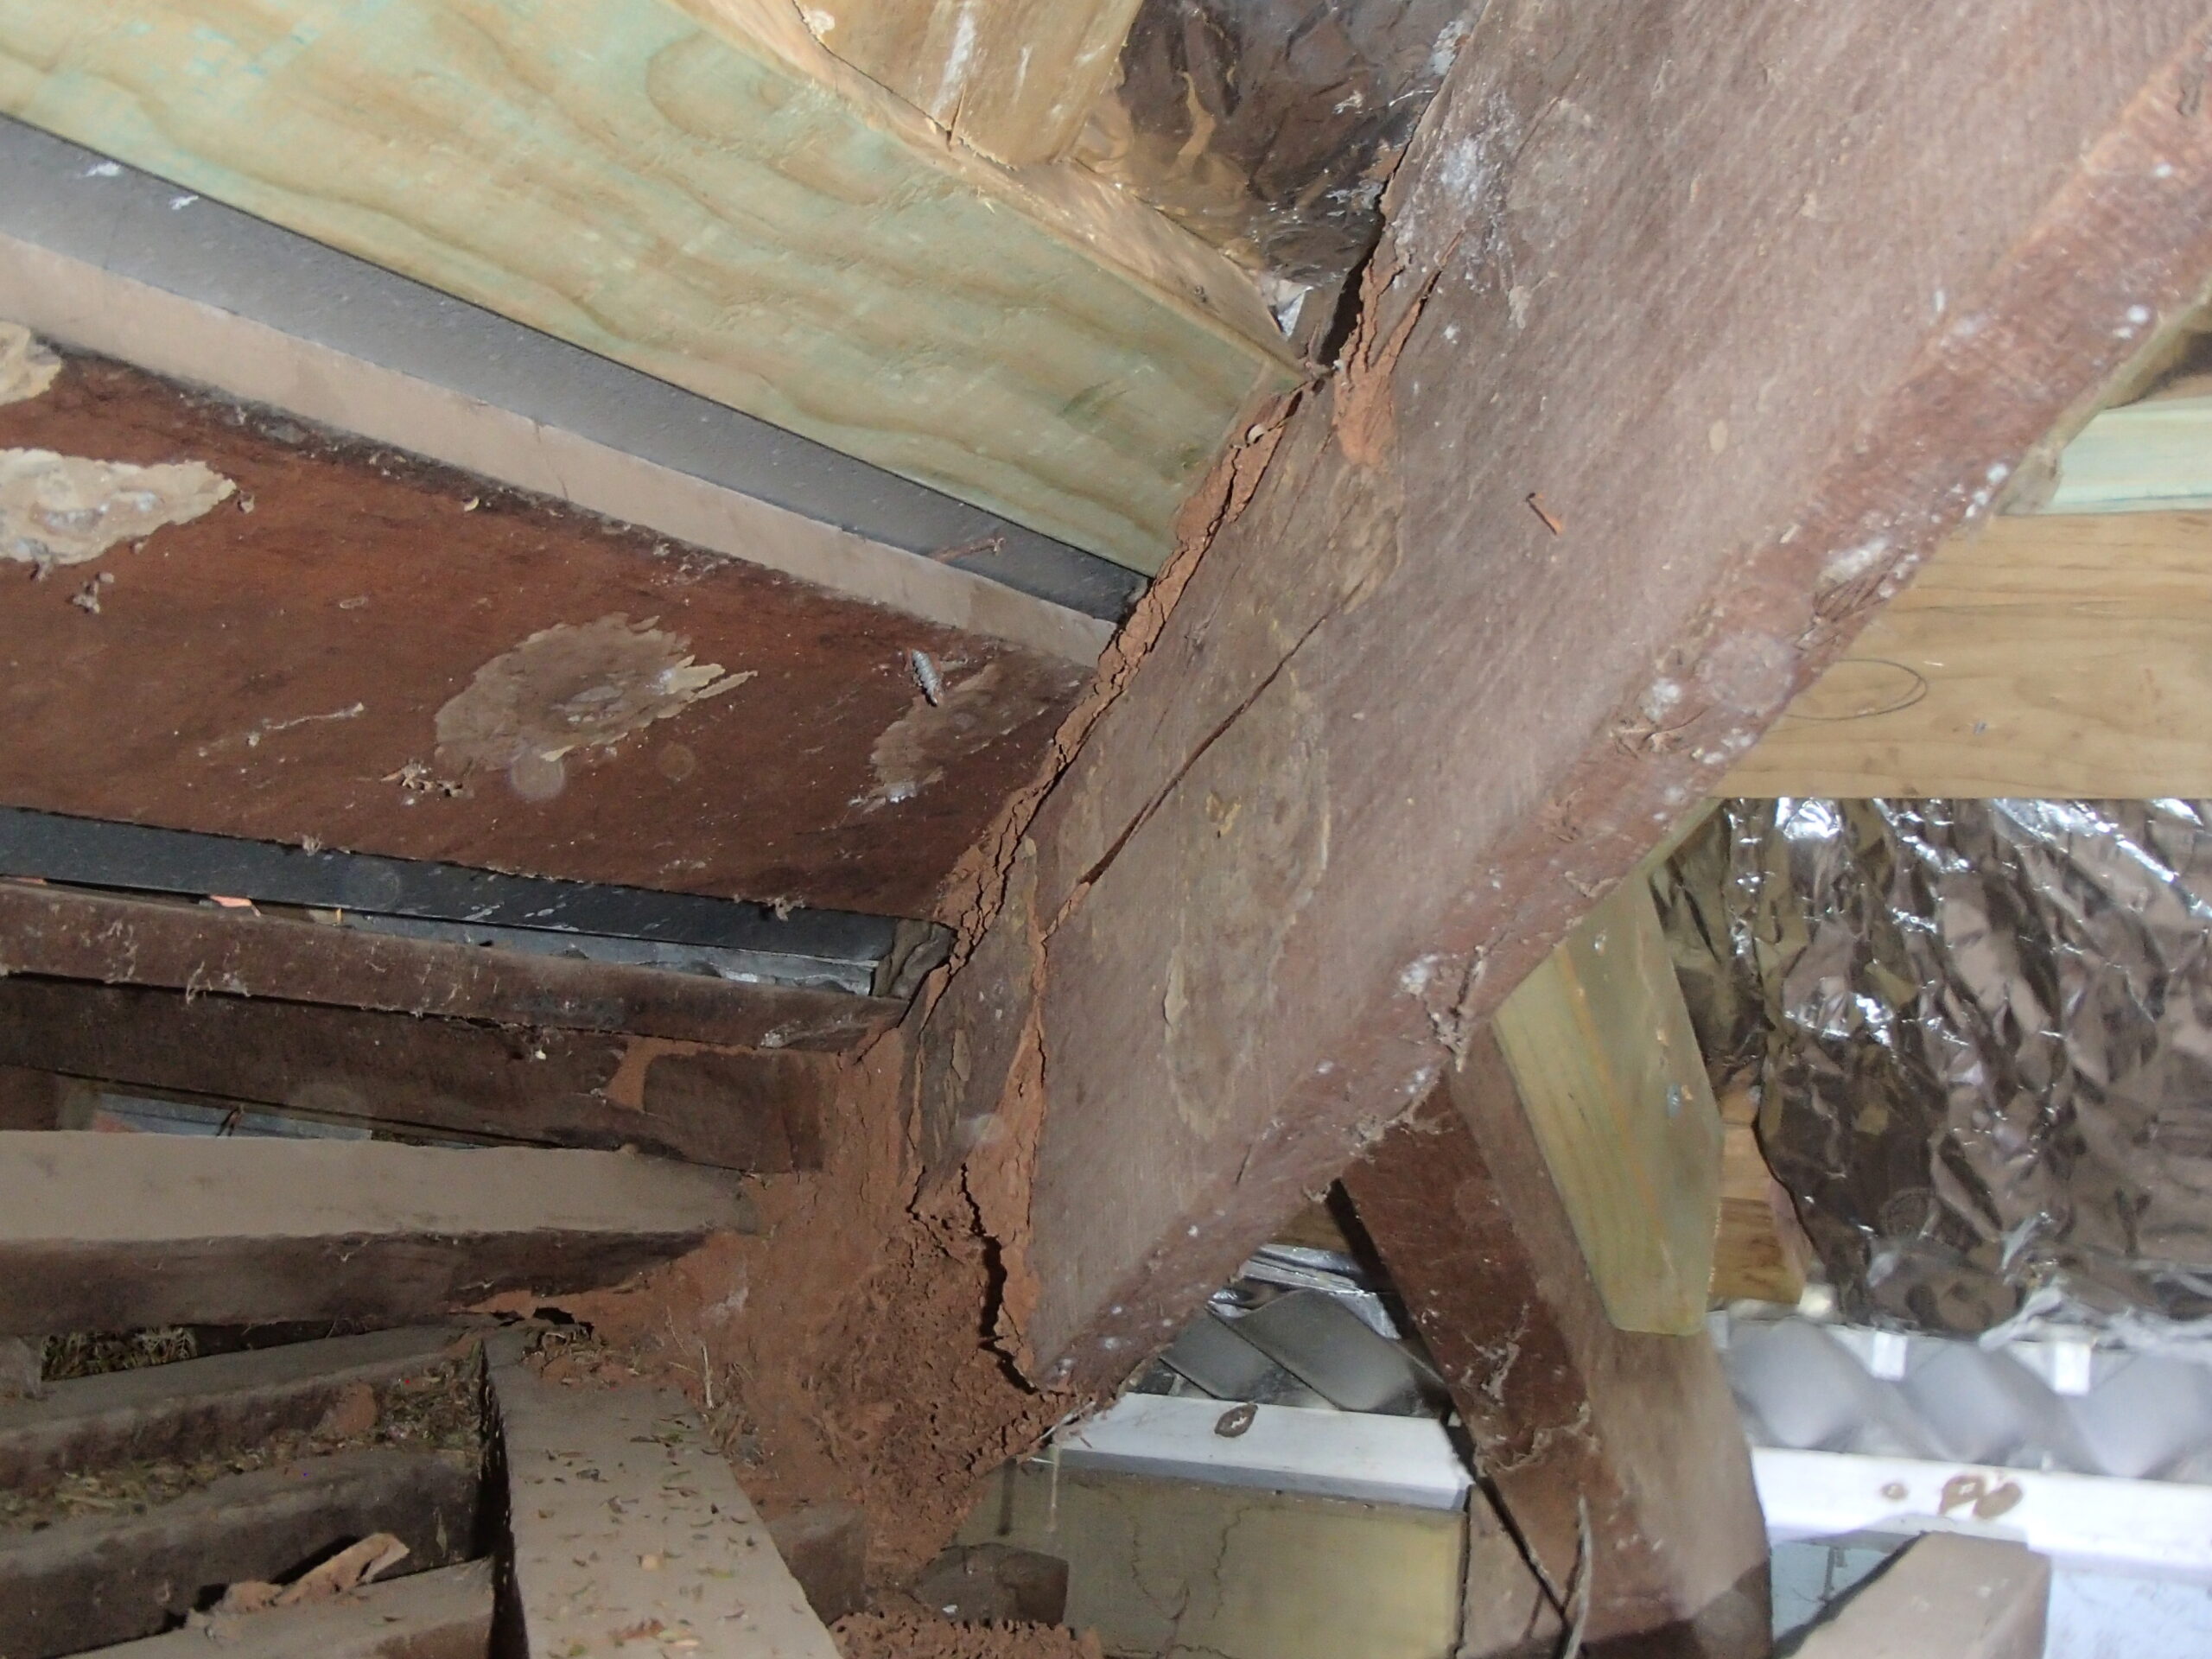 Image of termite damage detected during timber pest inspection report conducted in Bunbury, termite inspection required for home purchase. Termite Inspection Reports to Australian Standard AS.4349-2010.